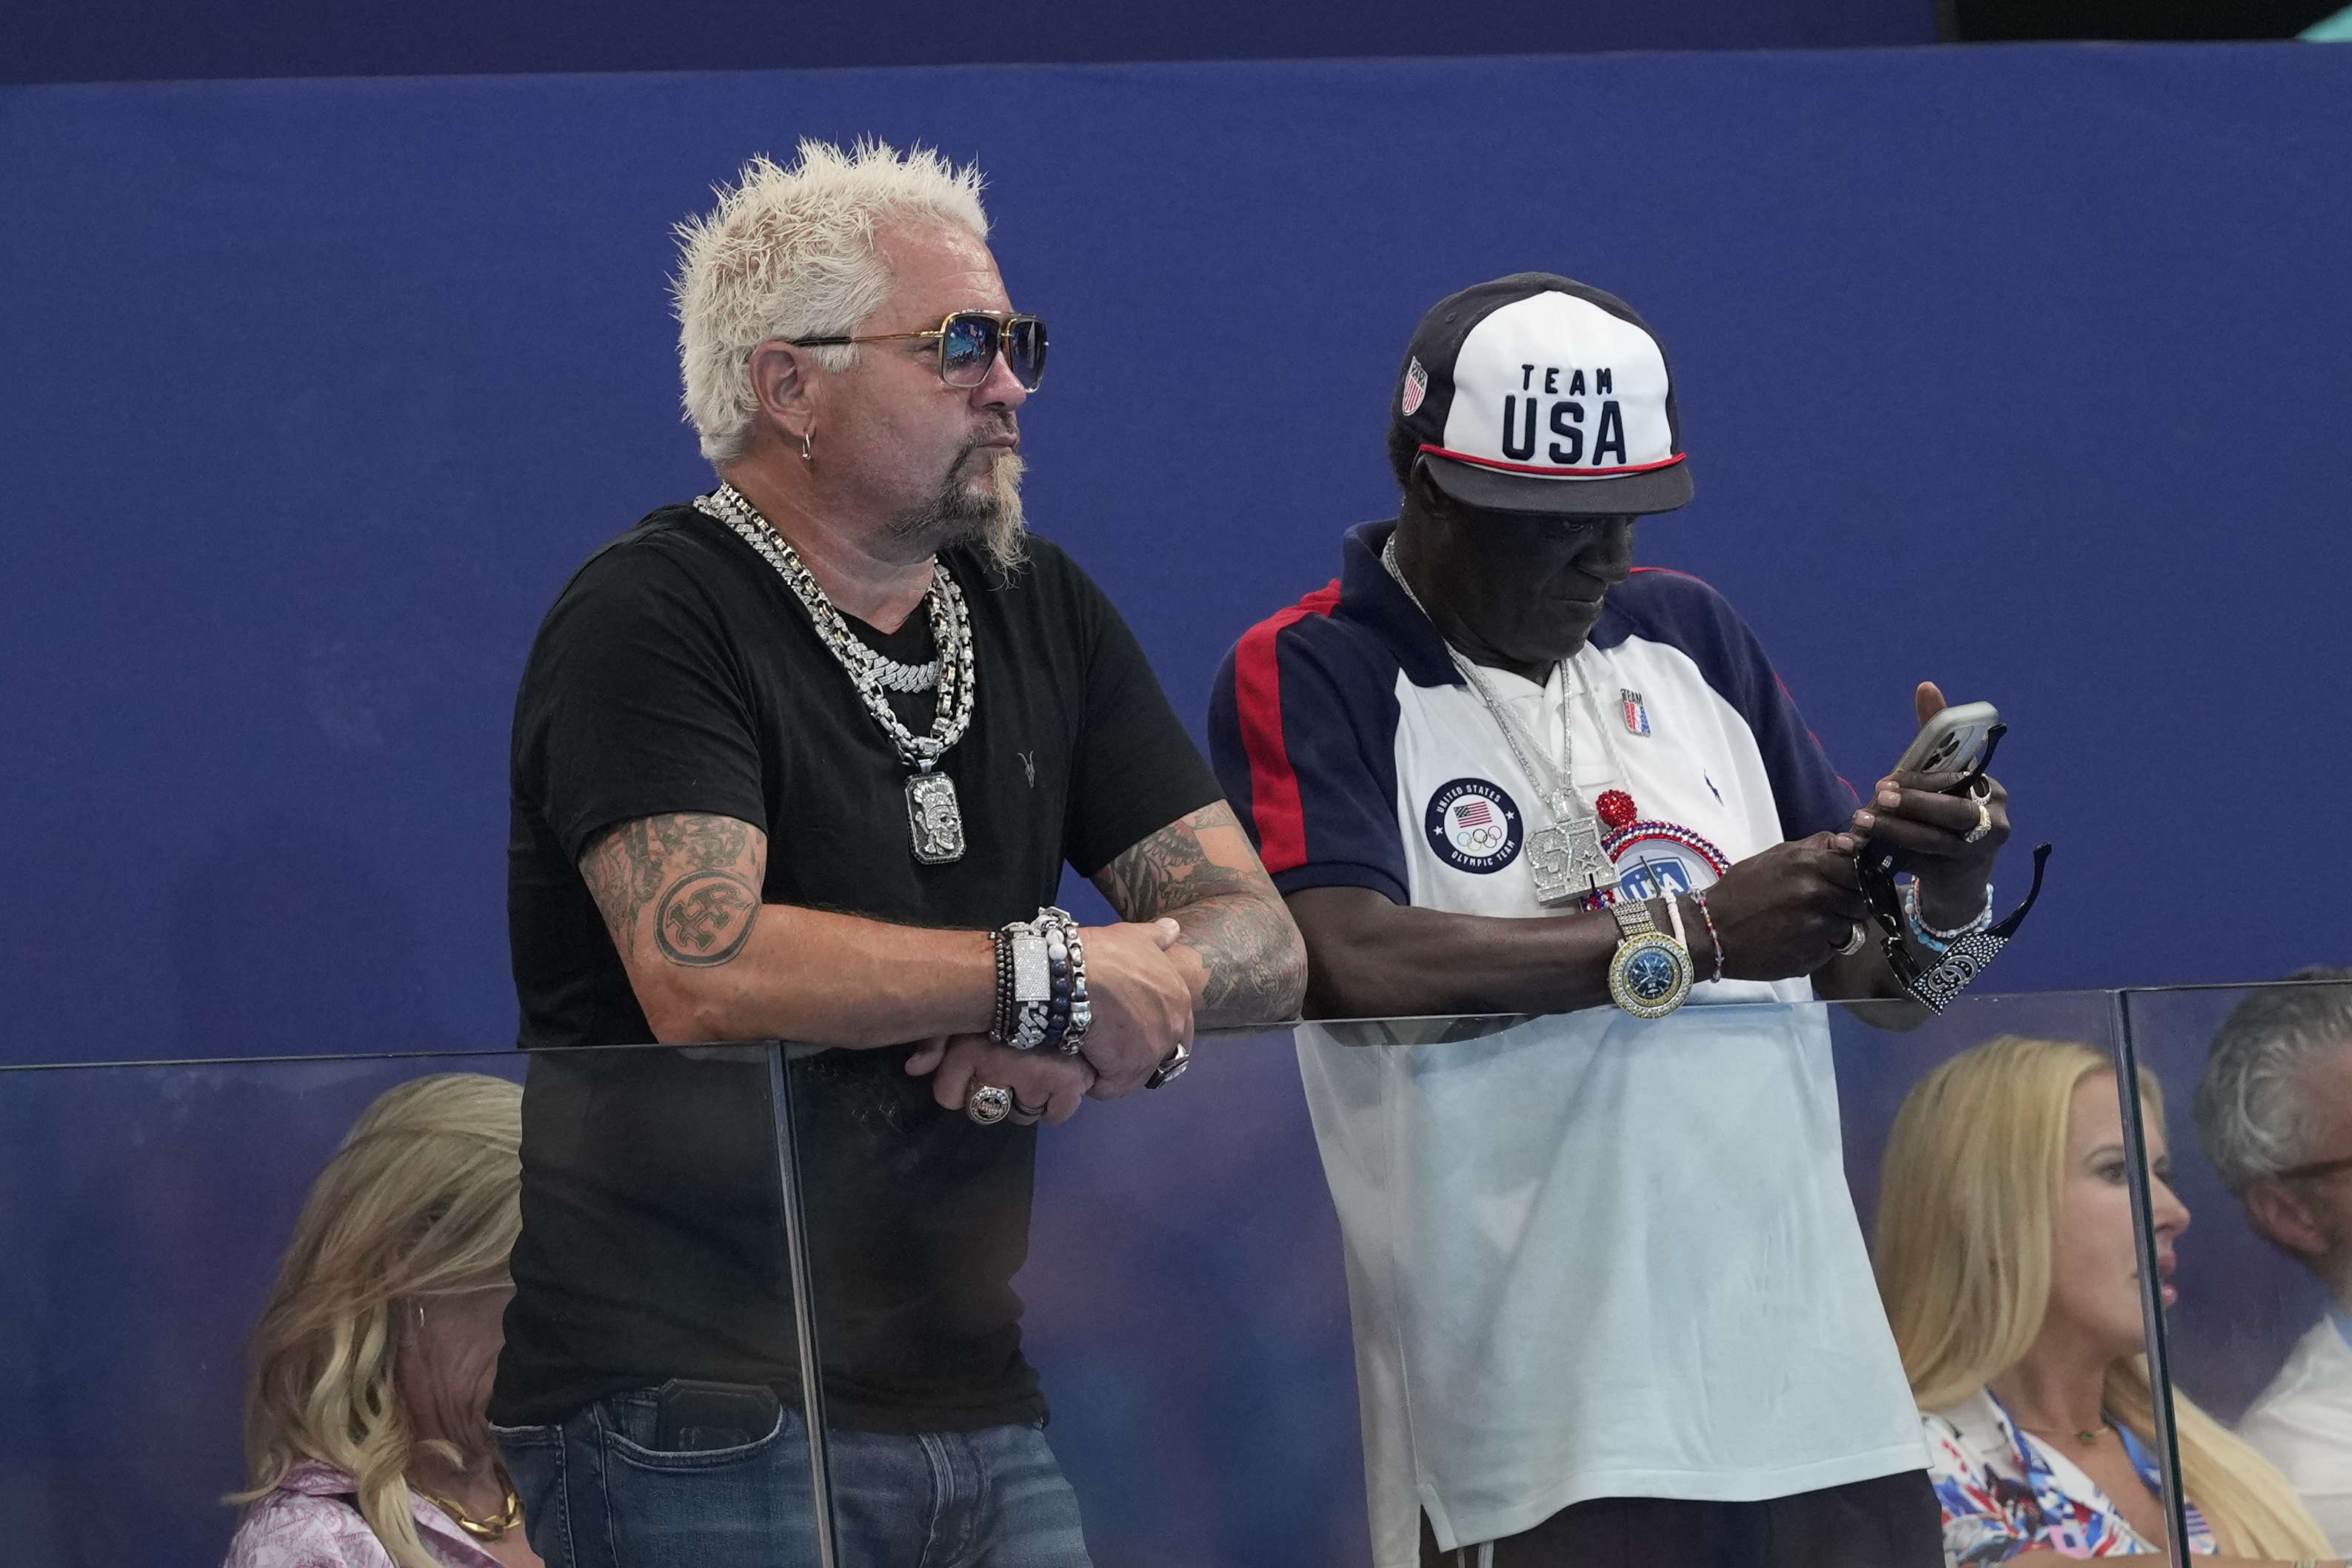 Guy Fieri and Flavor Flav at the women’s water polo Group B preliminary match between the United States and France